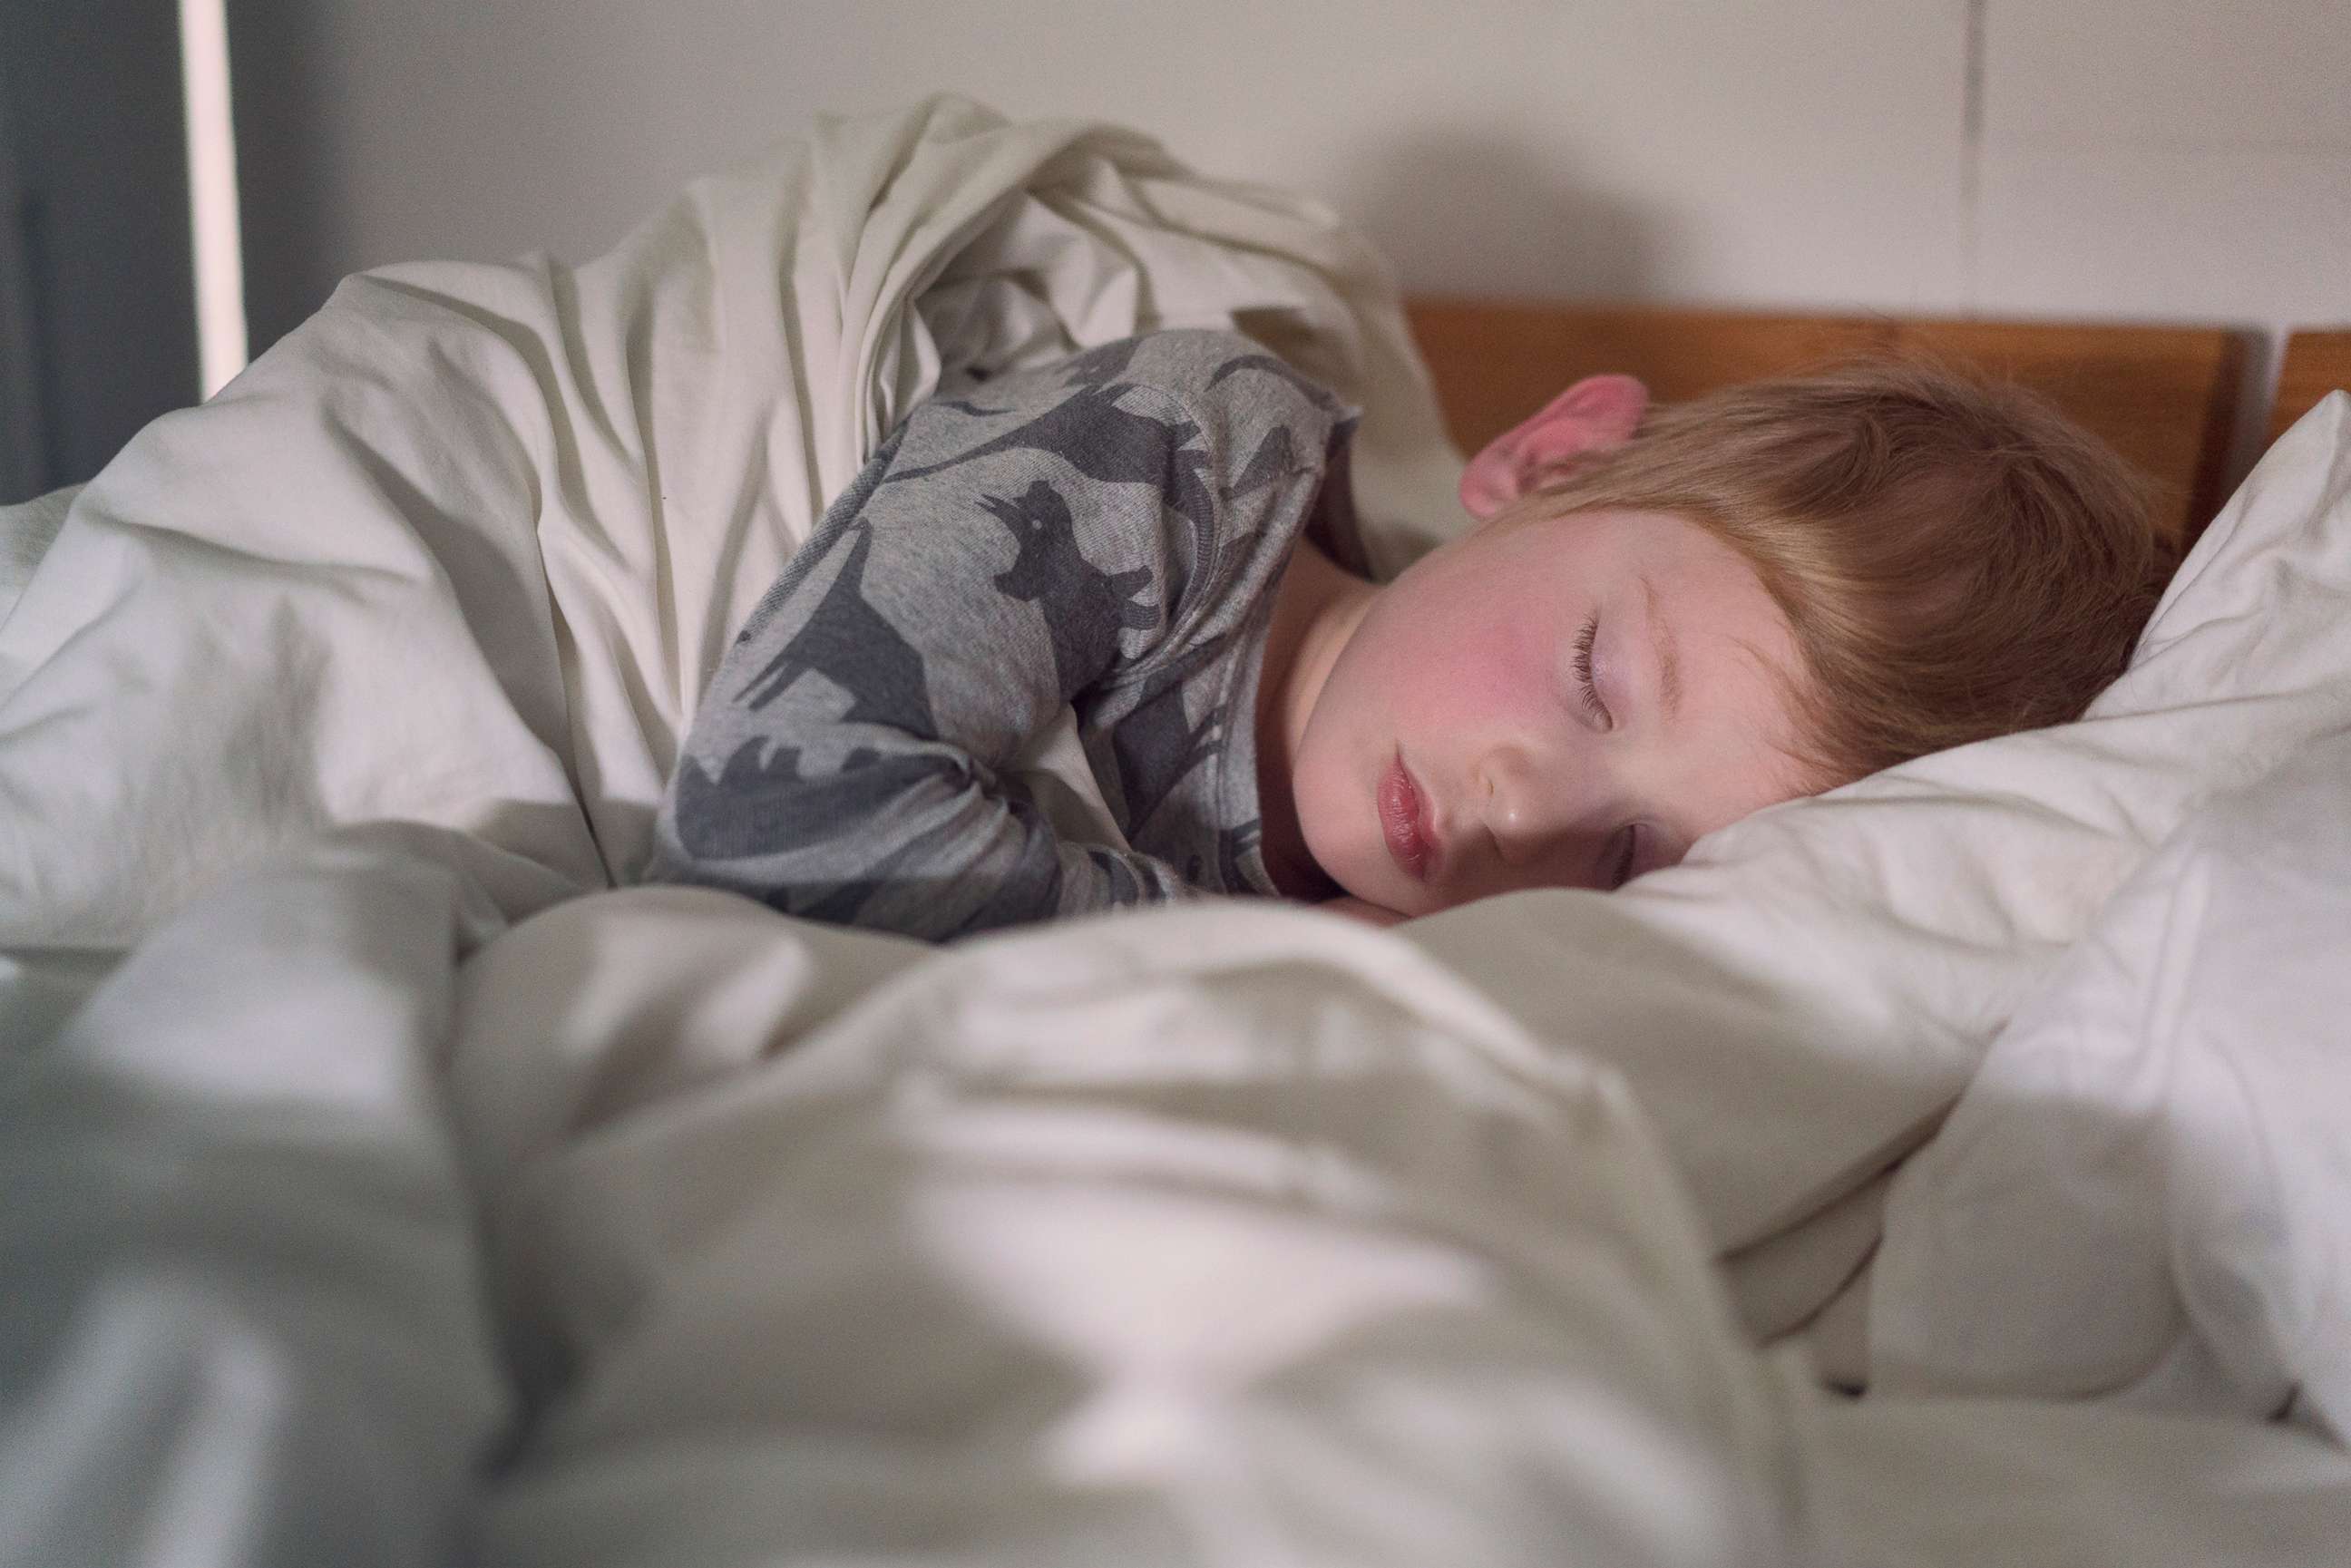 PHOTO: A young boy sleeps in bed in an undated stock photo.